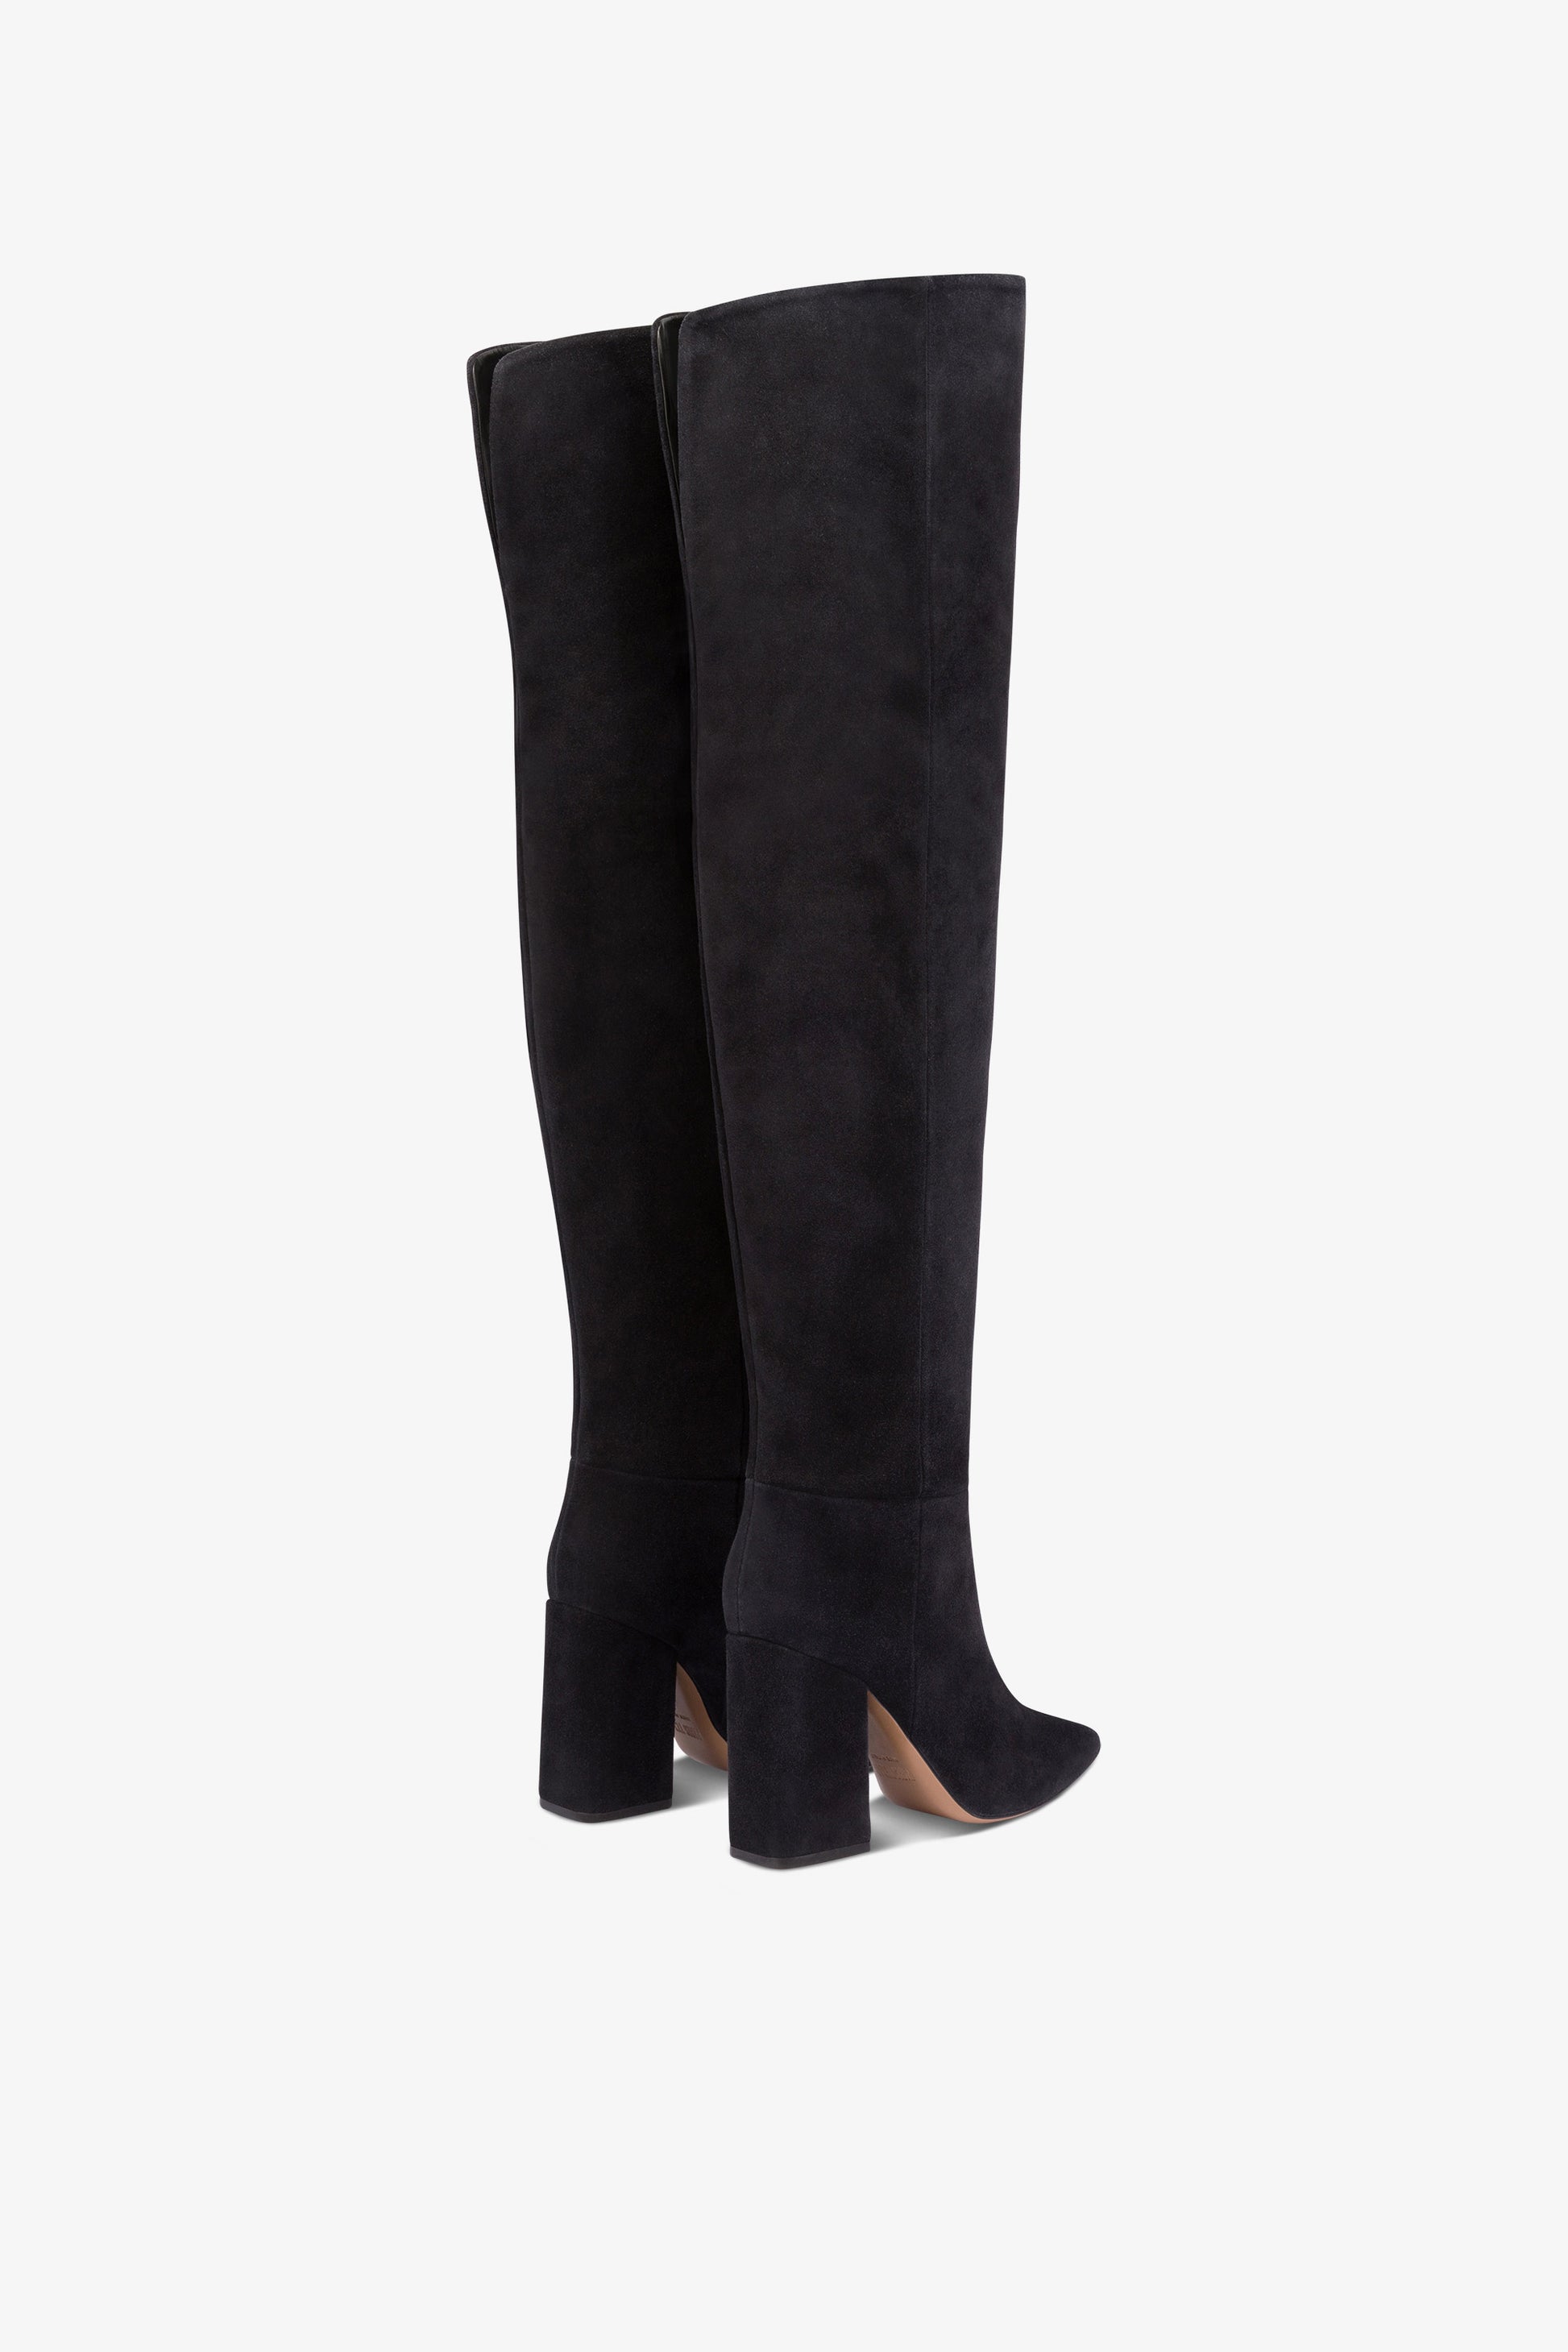 Over-the-knee, long pointed boots in soft off-black suede leather